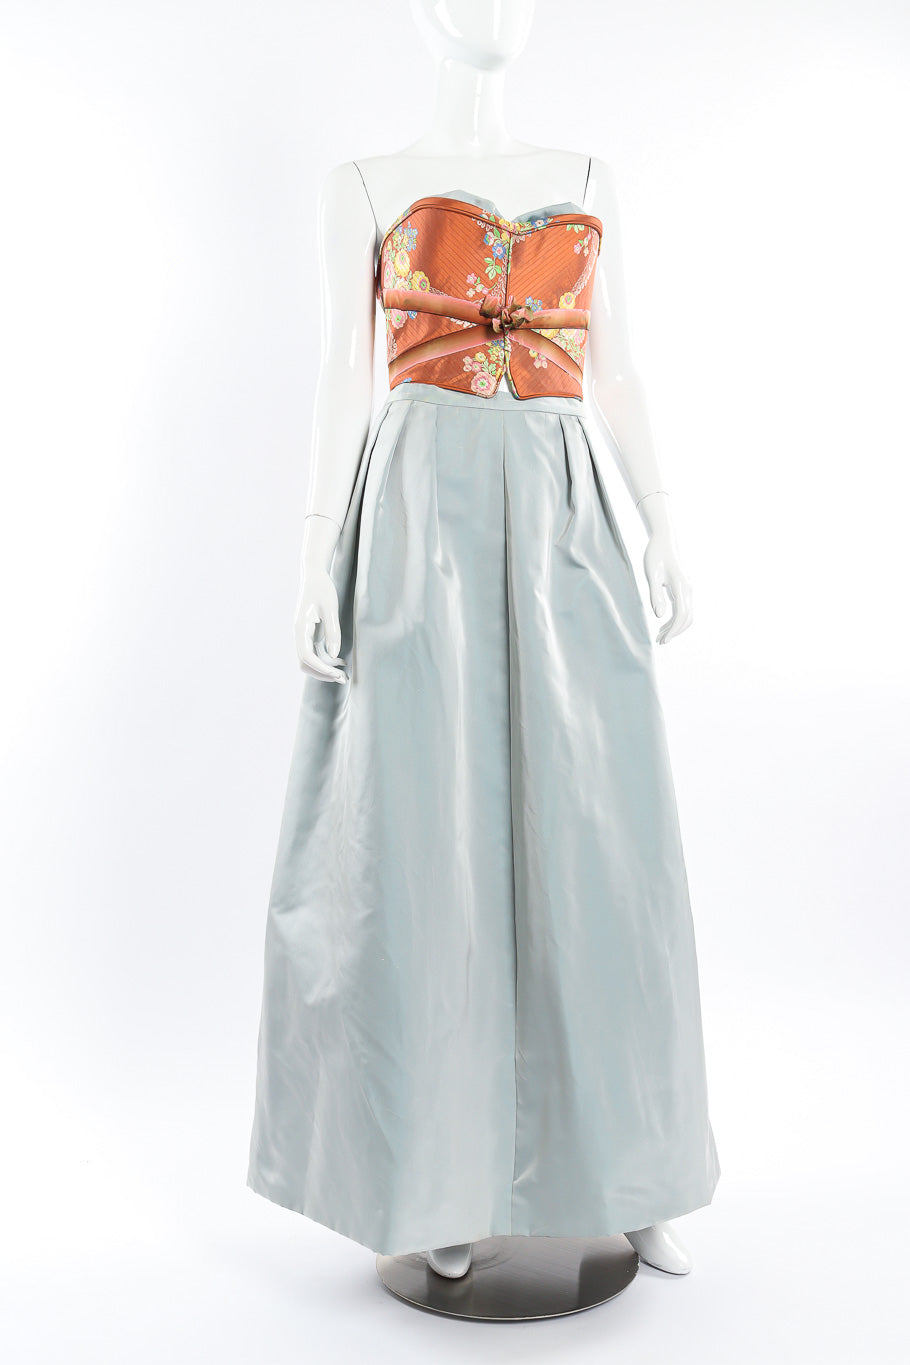 Corset, skirt, and shawl set by Christian La Croix on mannequin front without shawl @recessla